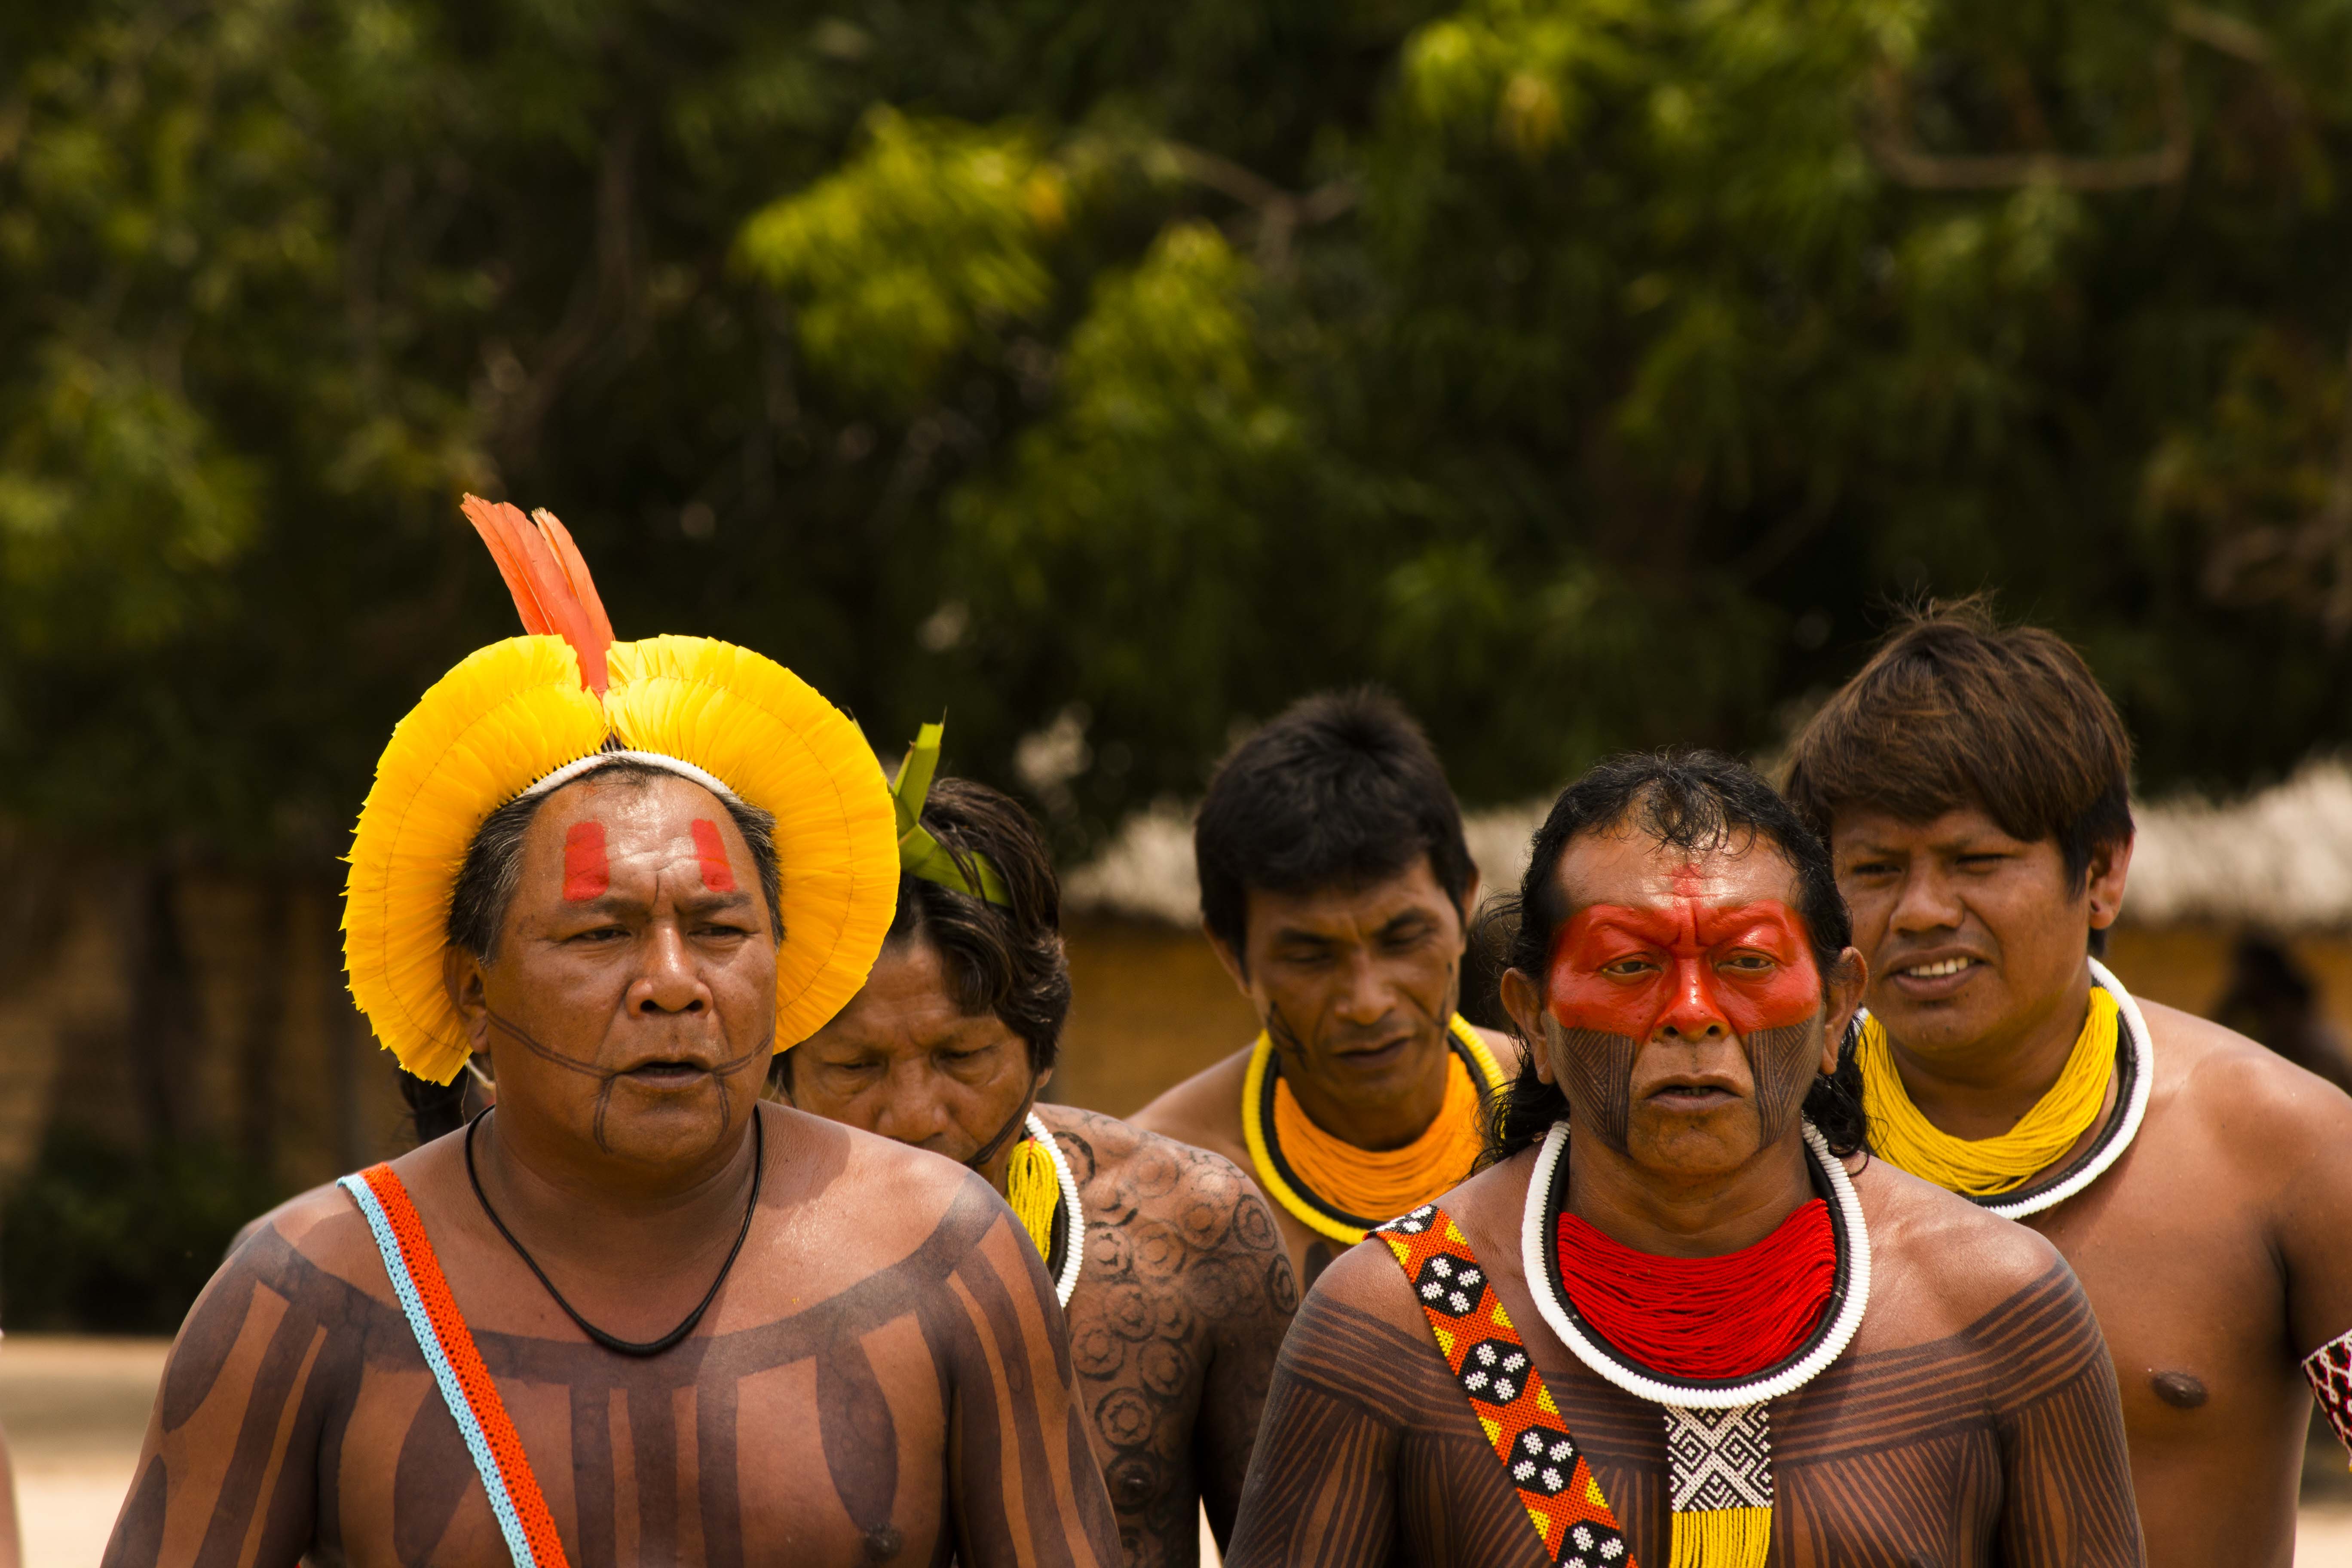 The bodies of the kayapo-mebêngokrê are always painted to some extent. Traditional body painting has an aesthetic purpose, but it the red paint, which is made from urucum, also works as a mosquito repellent.